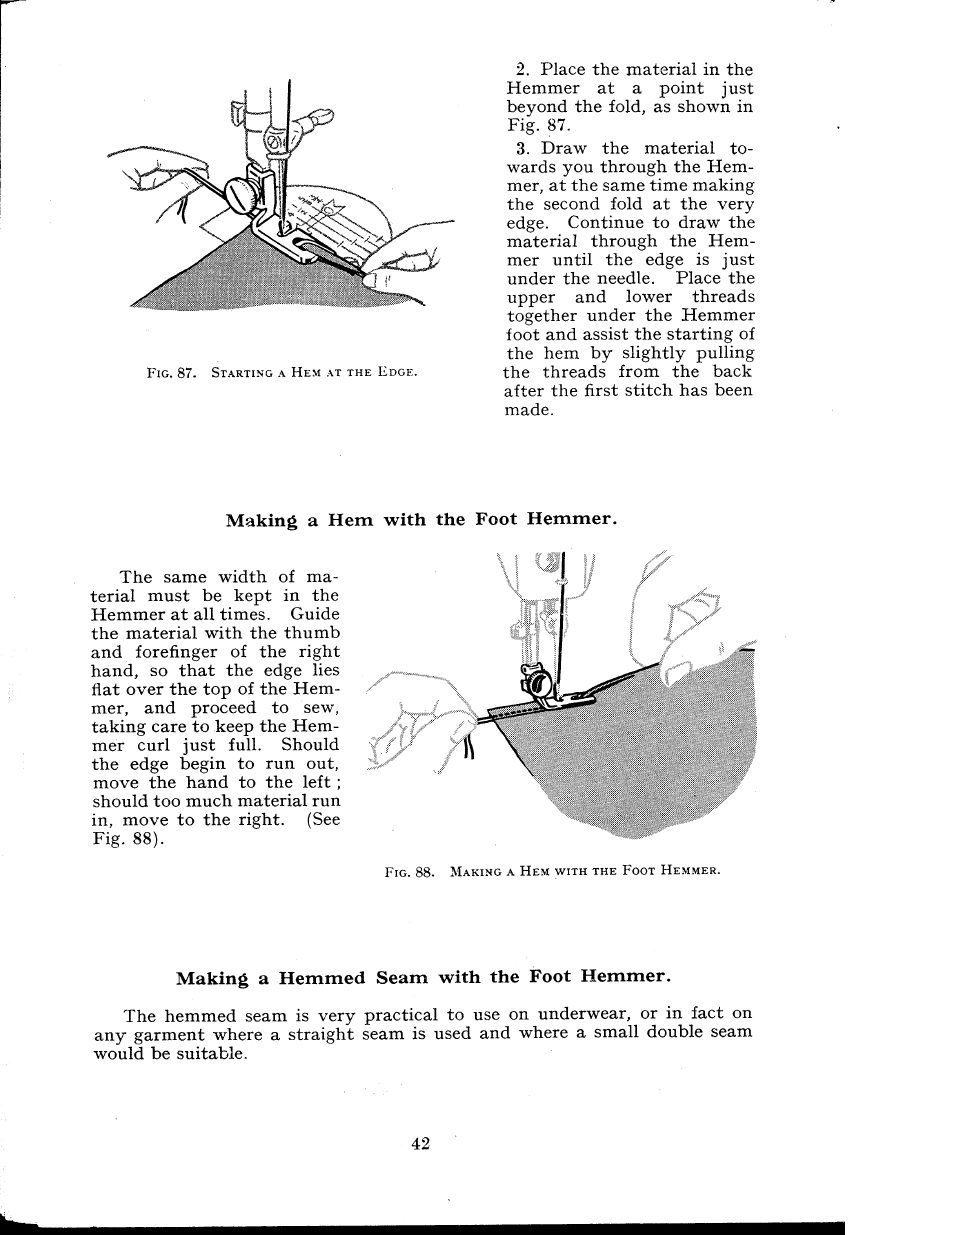 Making a hem with the foot hemmer, Making a hemmed seam with the foot hemmer | SINGER 404K User Manual | Page 42 / 78